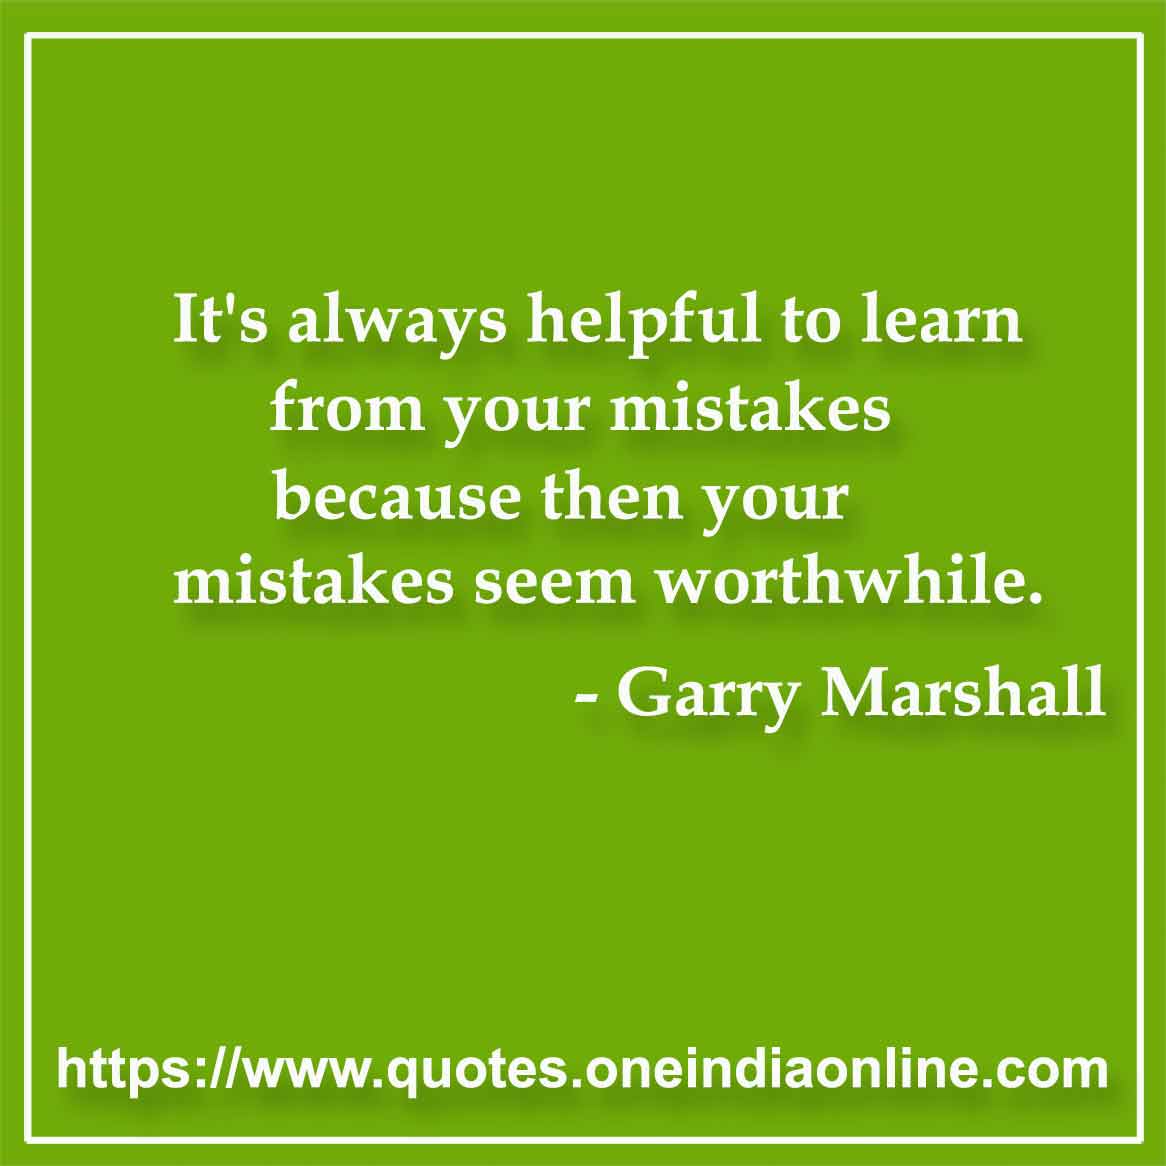 It's always helpful to learn from your mistakes because then your mistakes seem worthwhile.

- Mistake Quote by Garry Marshall